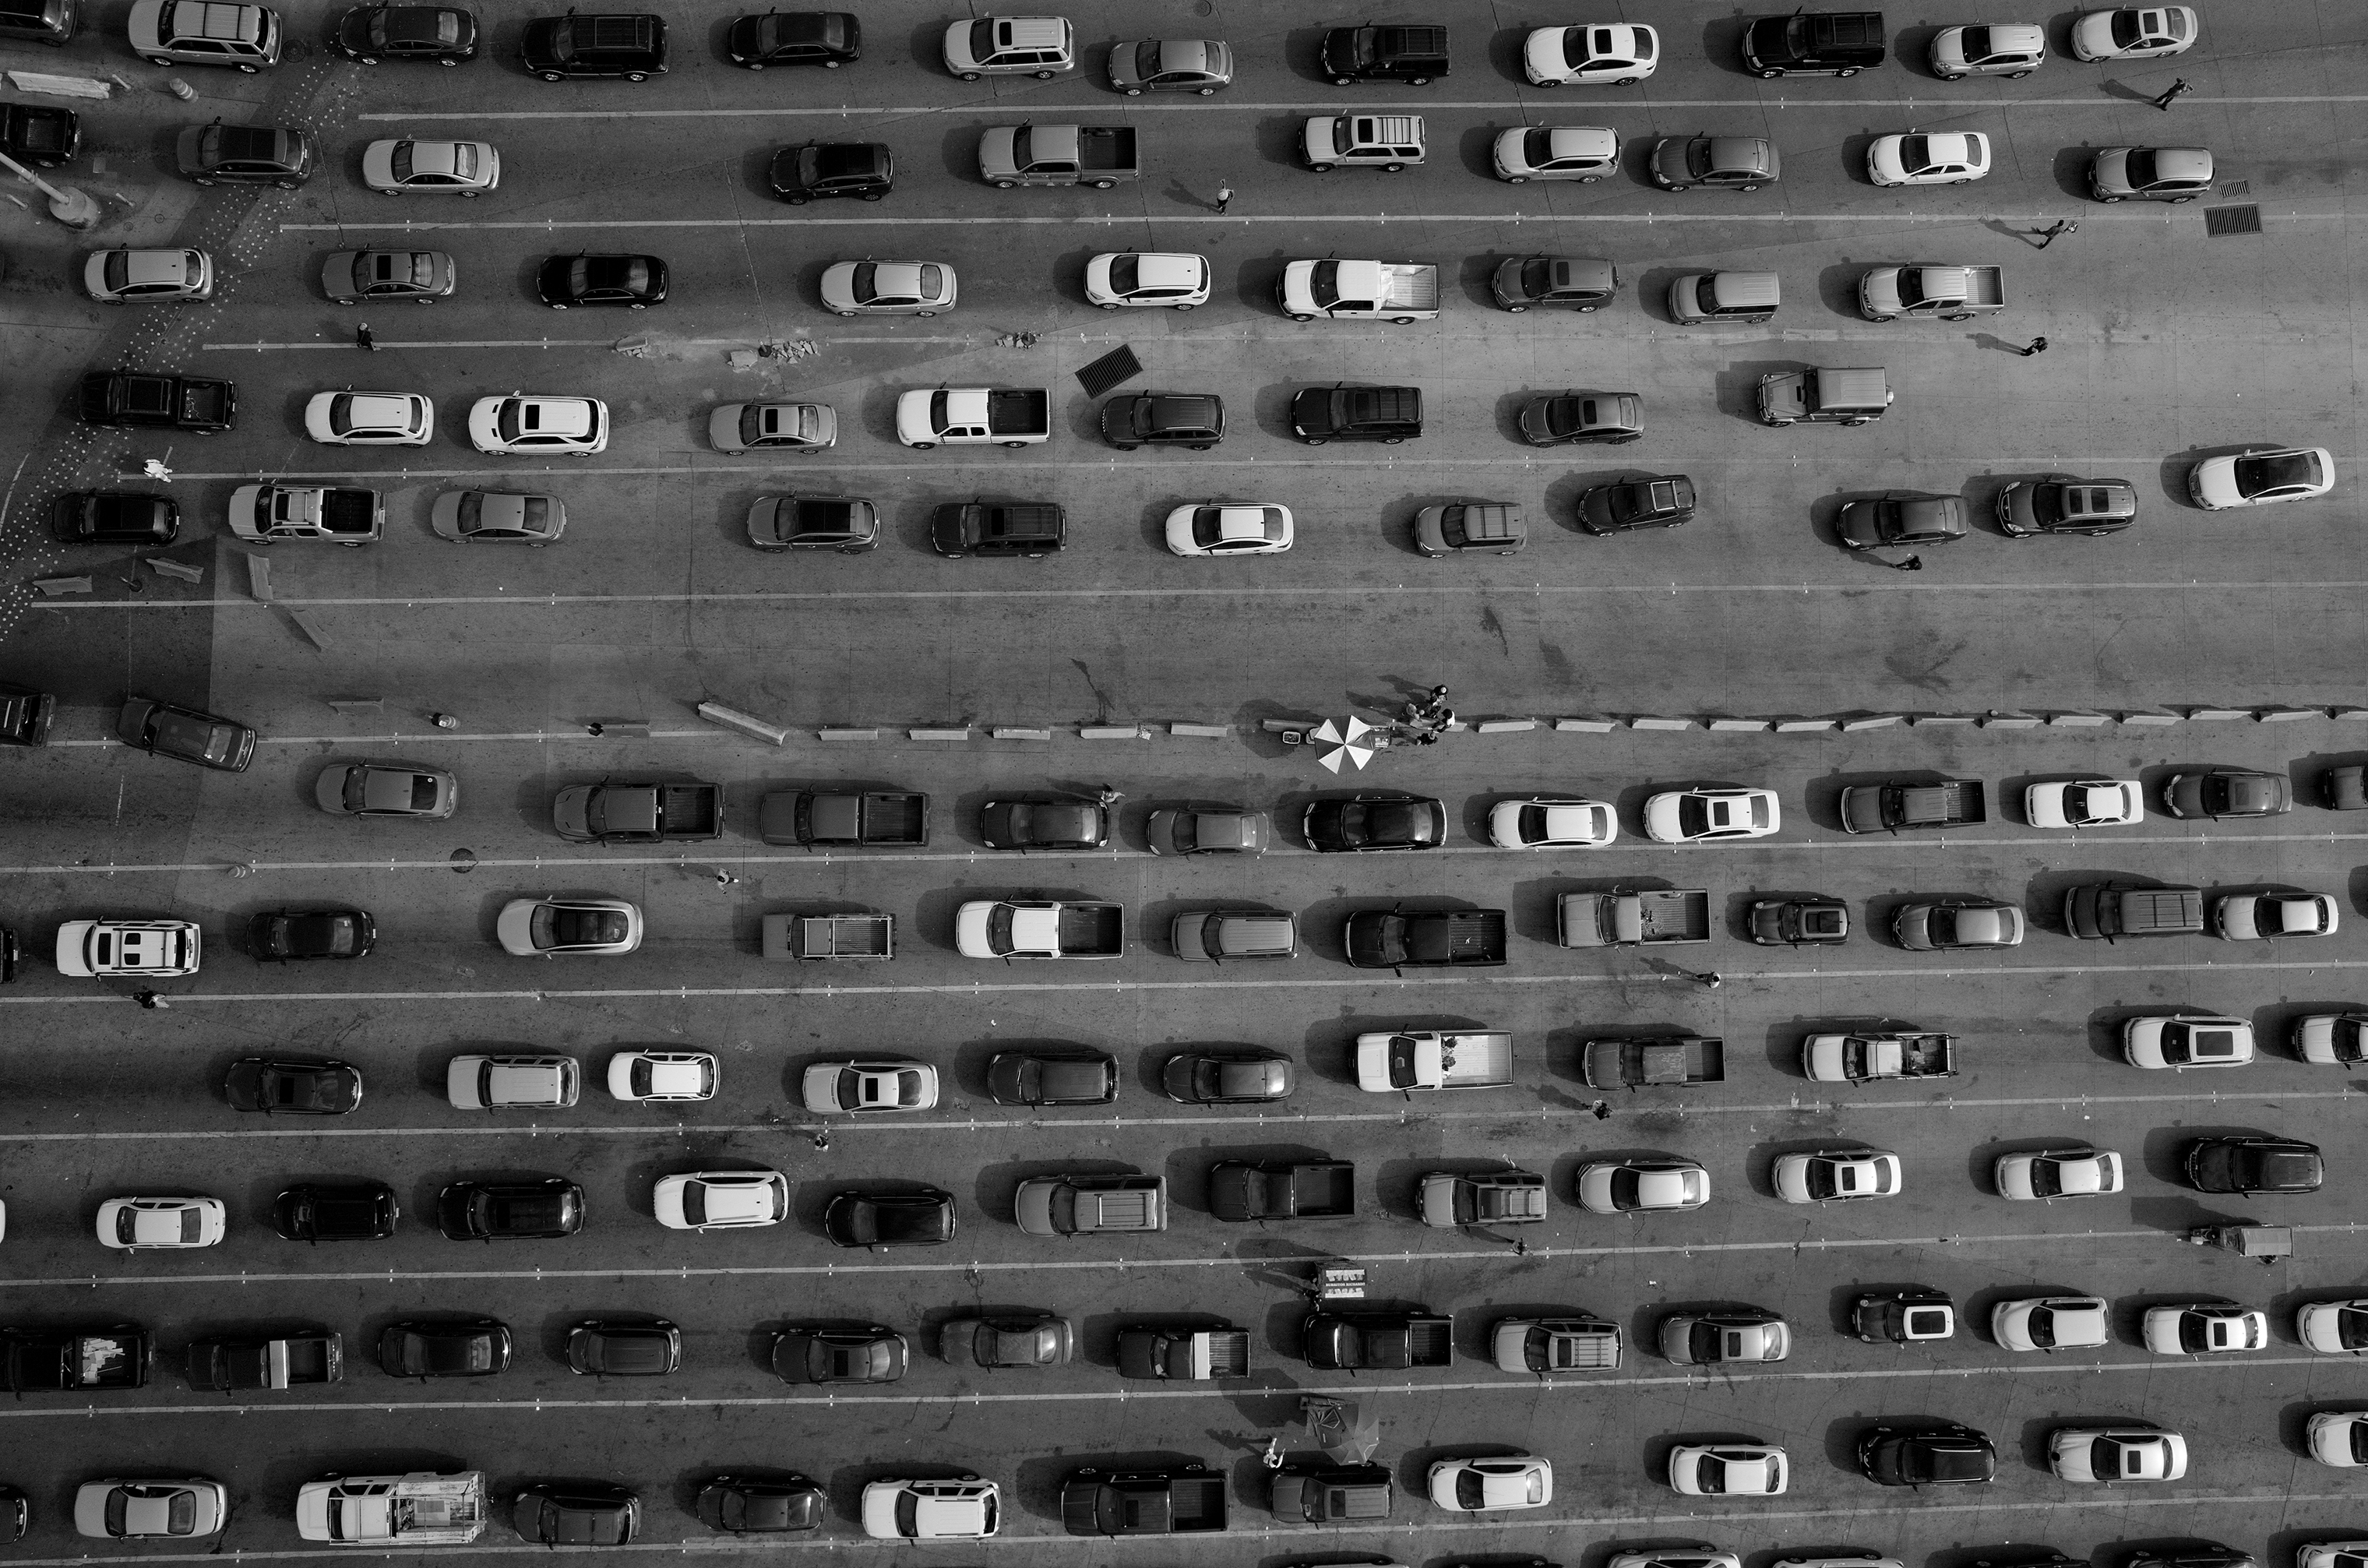 Lanes of cars line up along the U.S.-Mexico border at the port of entry at San Ysidro, California and Tijuana, Baja California. The port is the largest land border crossing point in the world. (Tomas van Houtryve—VII)